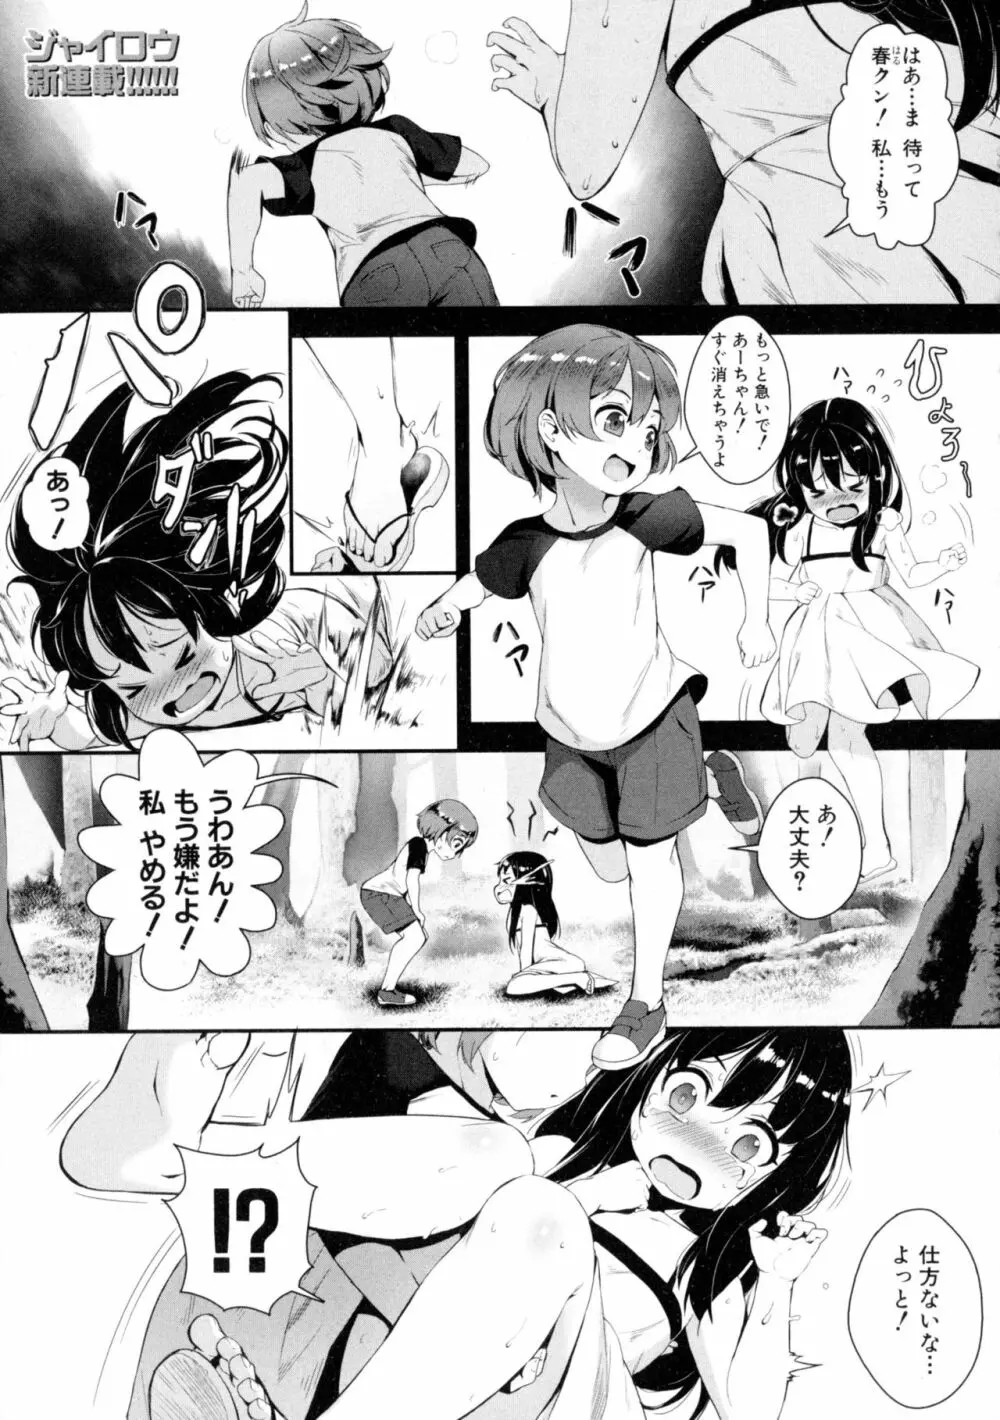 T.F.S 第1-4話 + 御負け Page.2